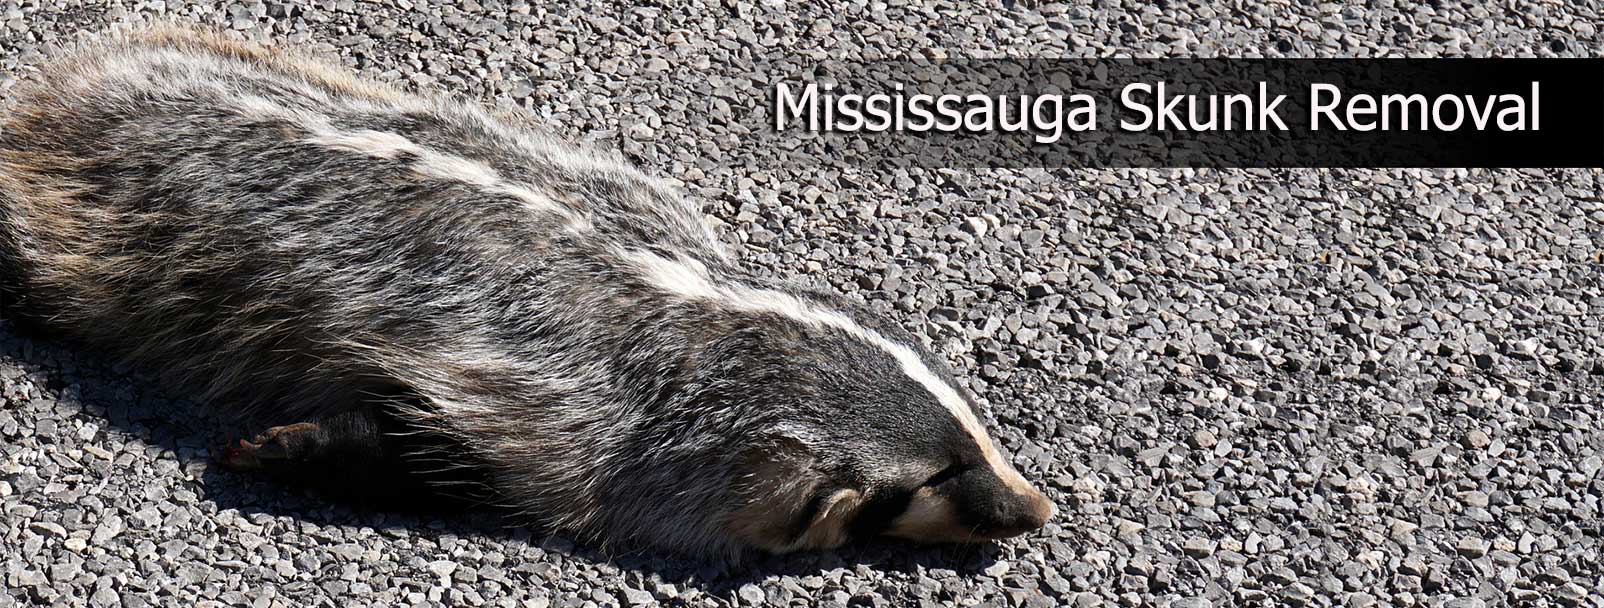 skunk control removal mississauga